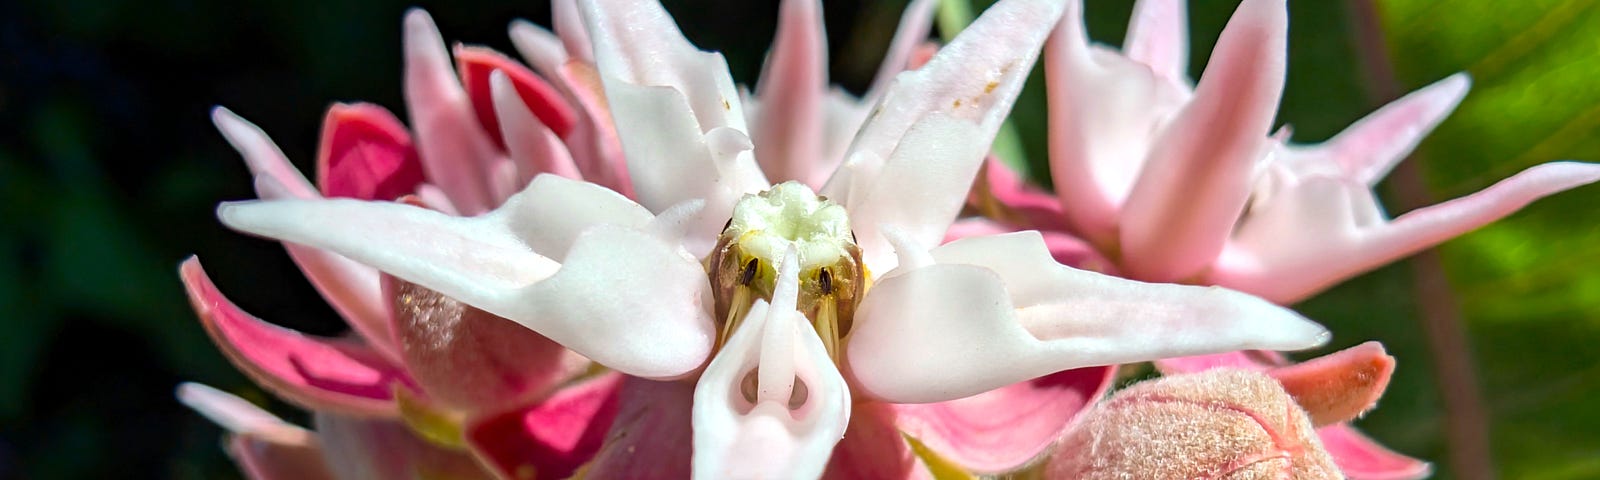 A vibrant close-up of a Showy Milkweed flower highlights its intricate and unique structure, with pale pink petals and fuzzy buds surrounding the central bloom. The background features green foliage, adding contrast and depth to the image